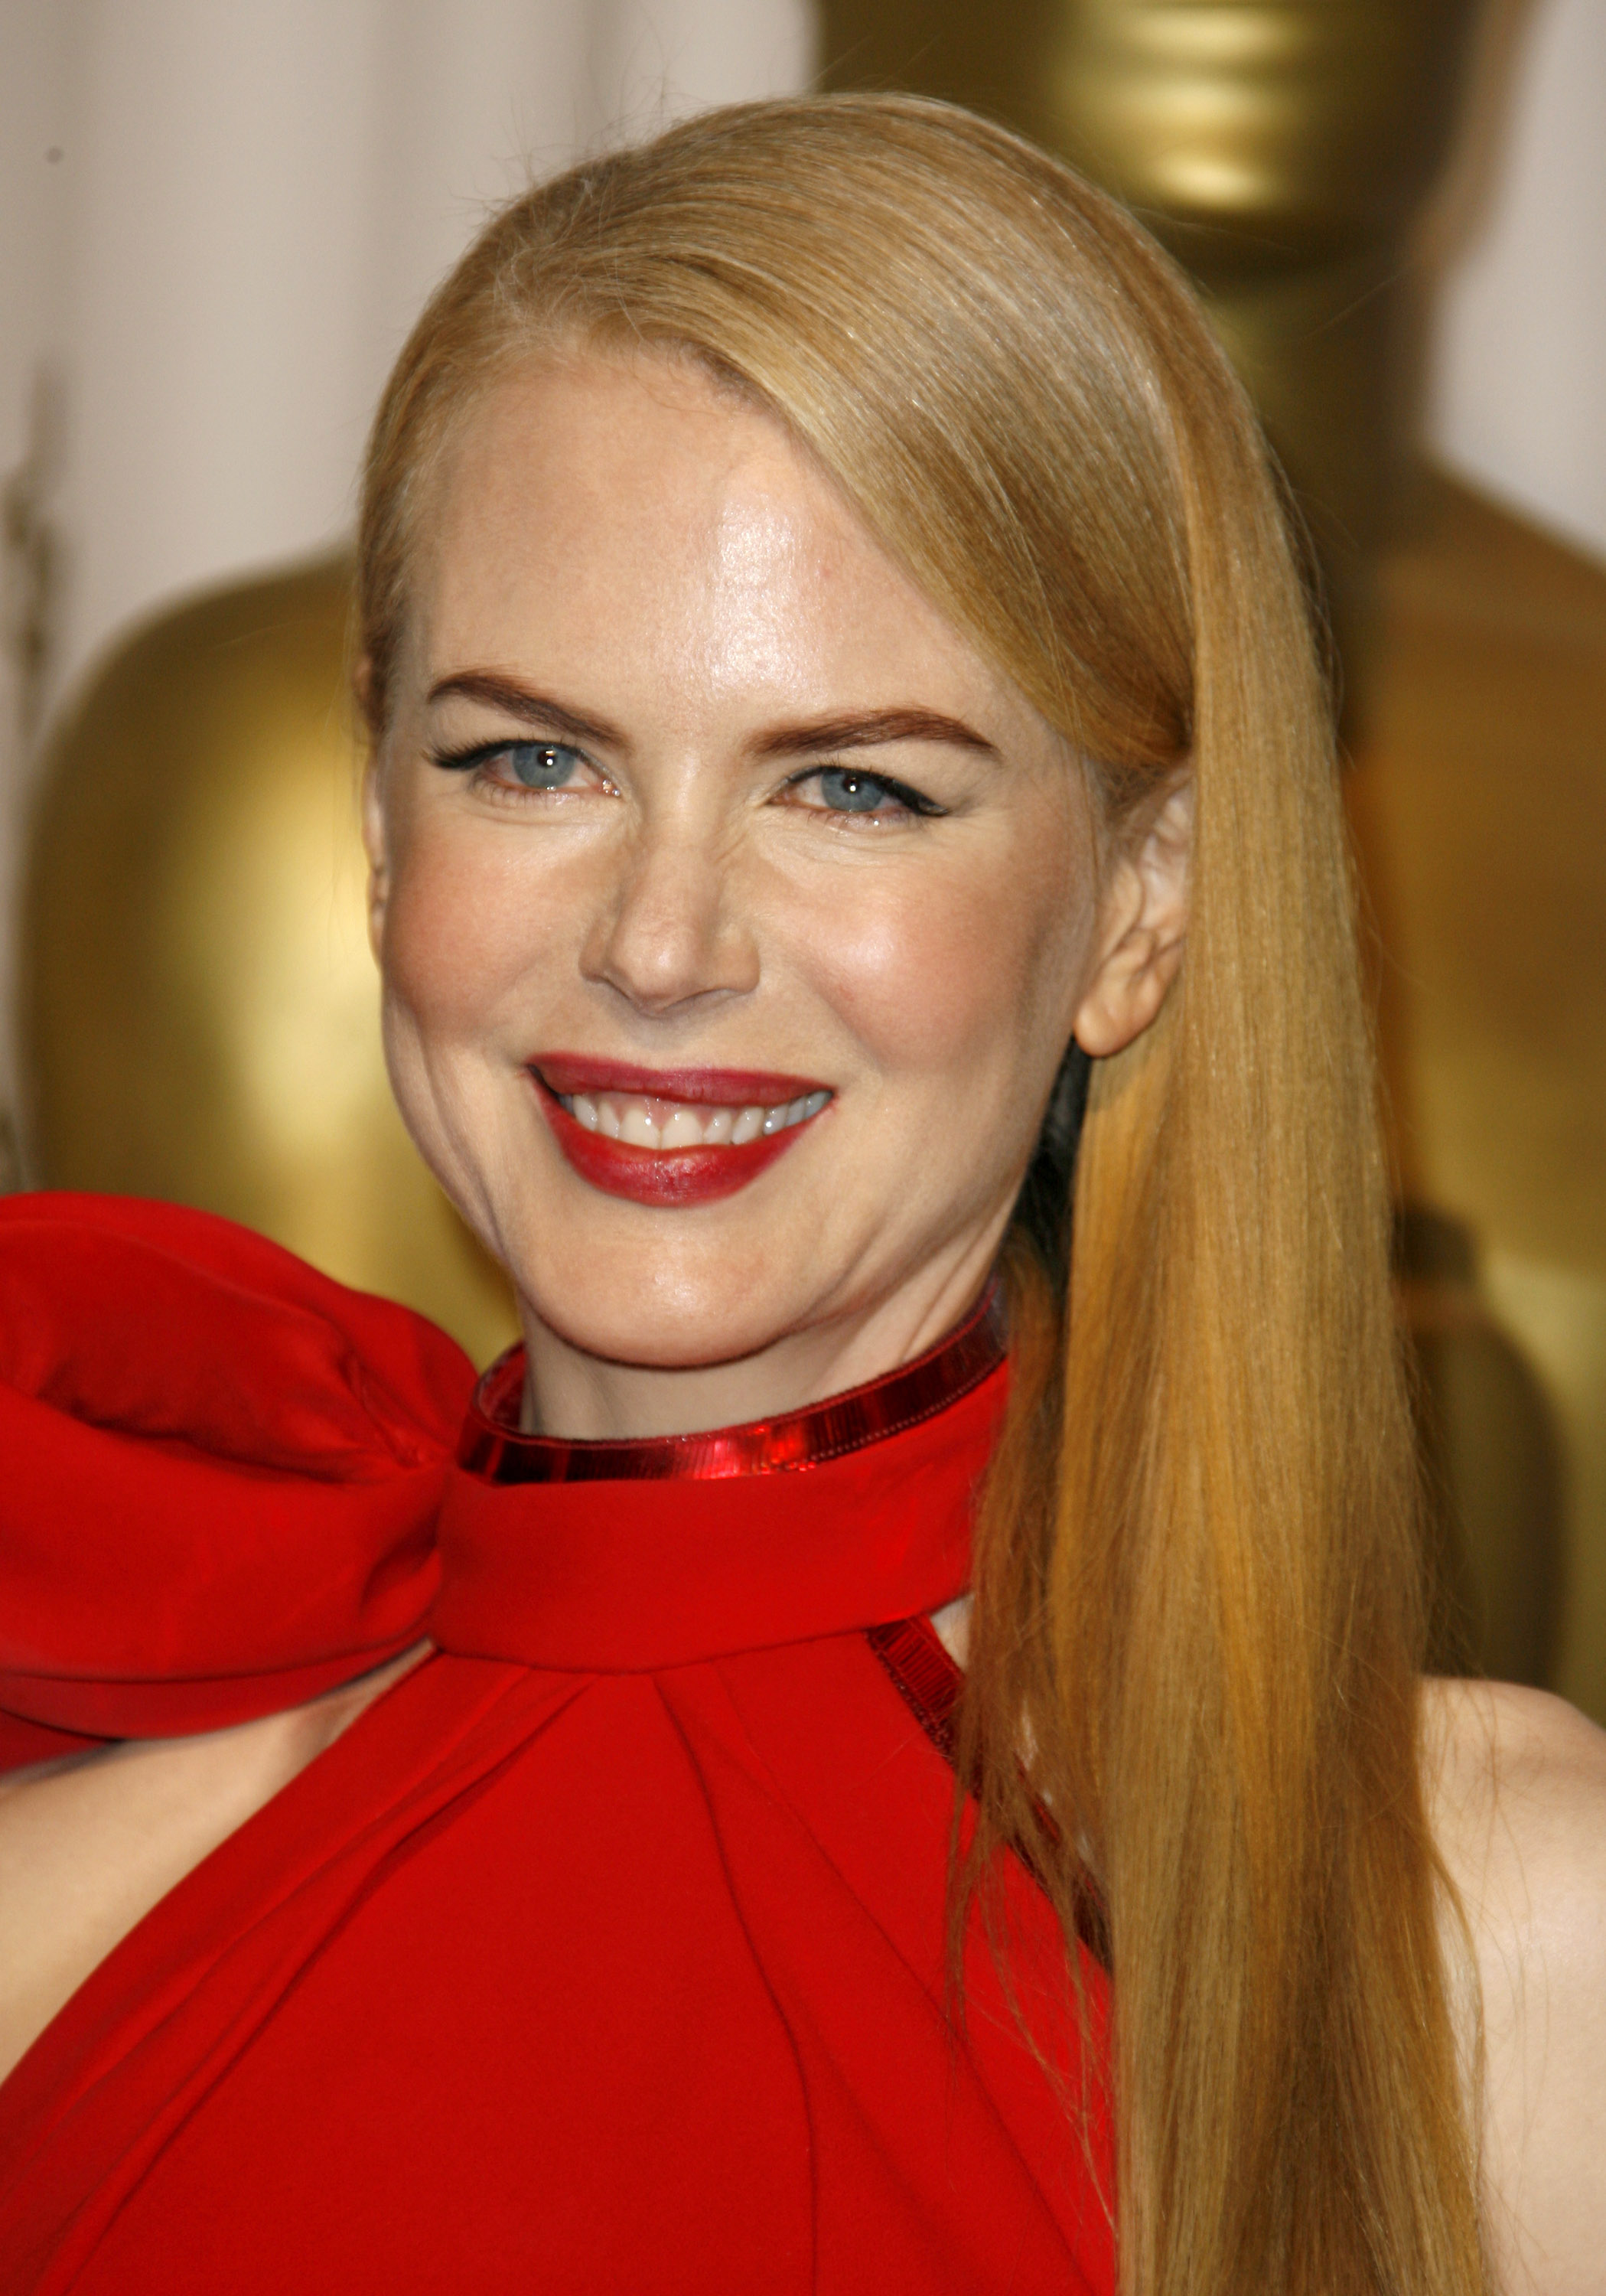 Nicole Kidman attends the 79th Annual Academy Awards on February 25, 2007 in Los Angeles, California | Source: Getty Images